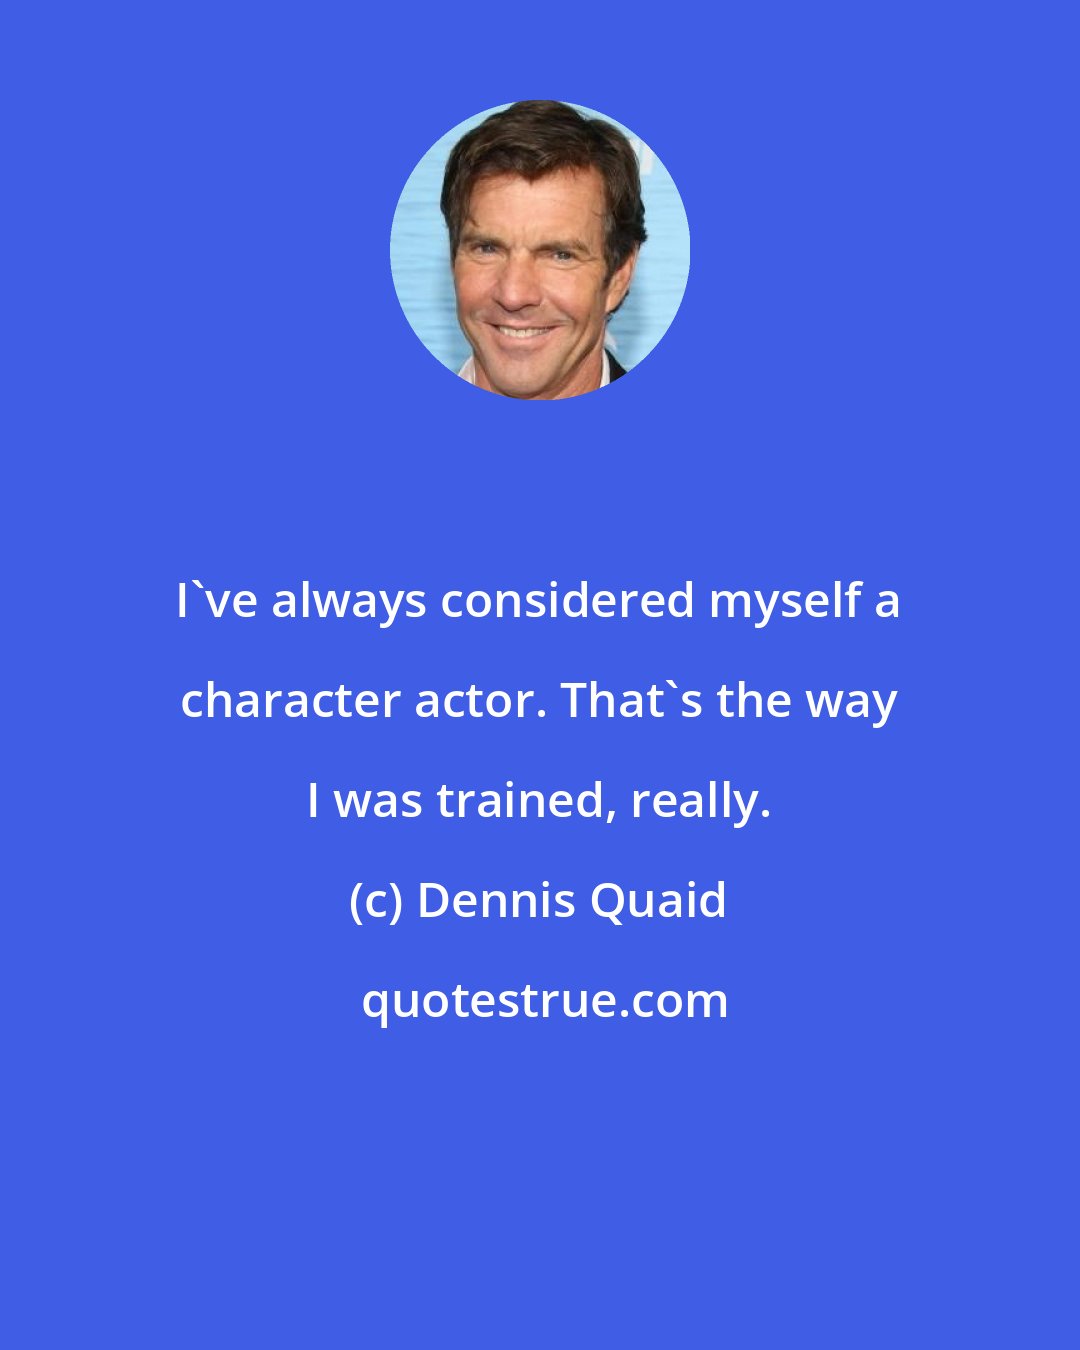 Dennis Quaid: I've always considered myself a character actor. That's the way I was trained, really.